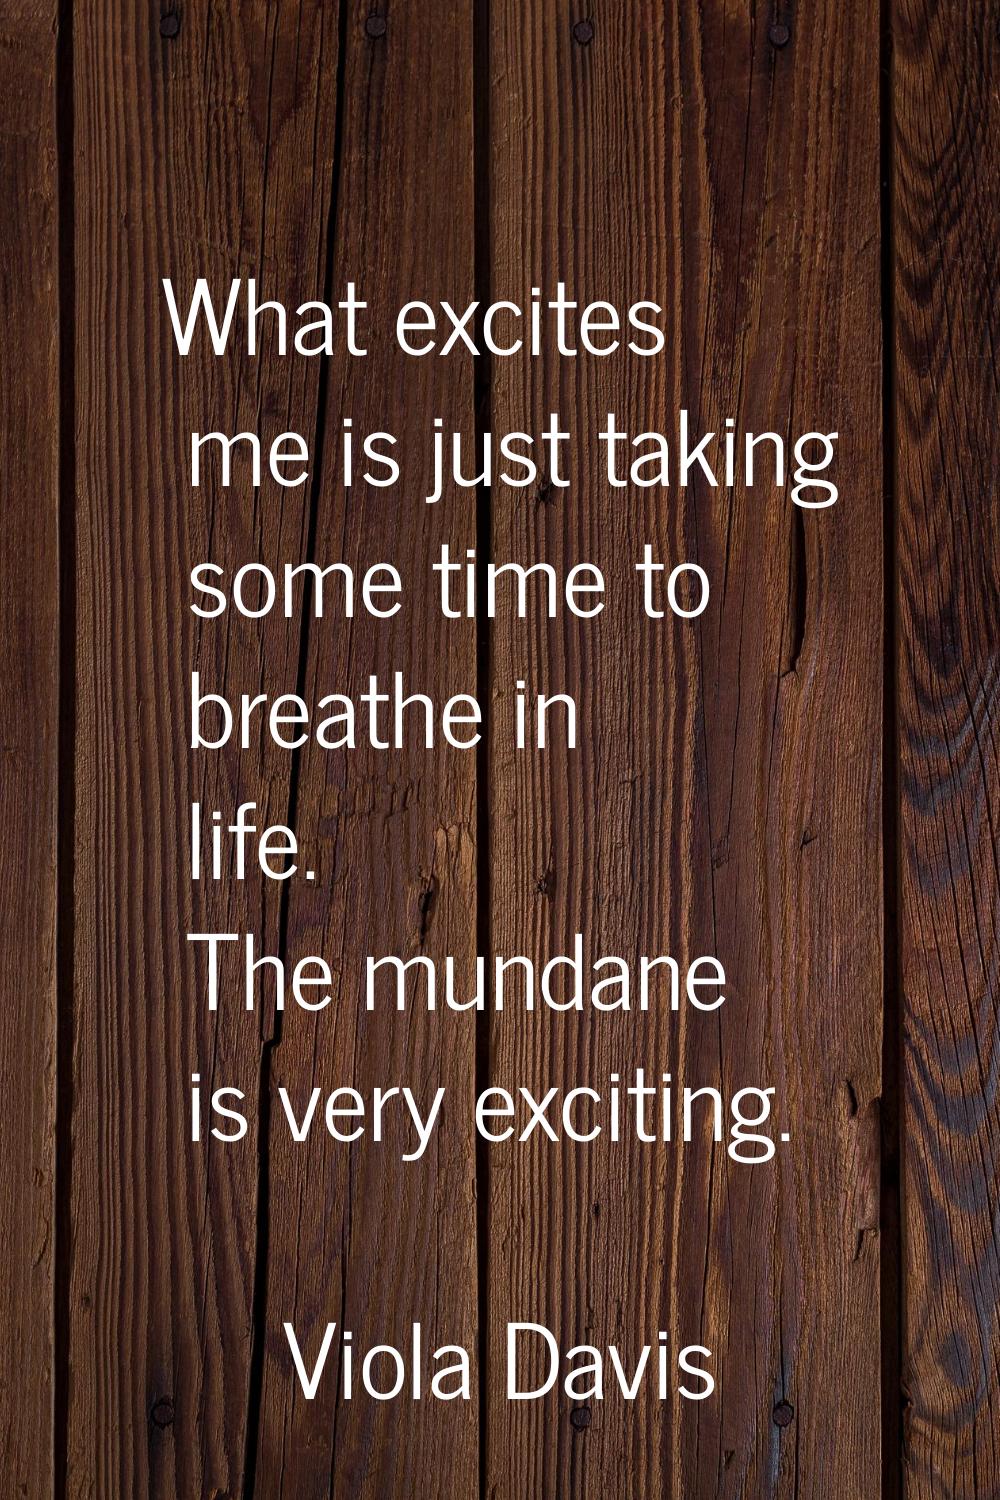 What excites me is just taking some time to breathe in life. The mundane is very exciting.